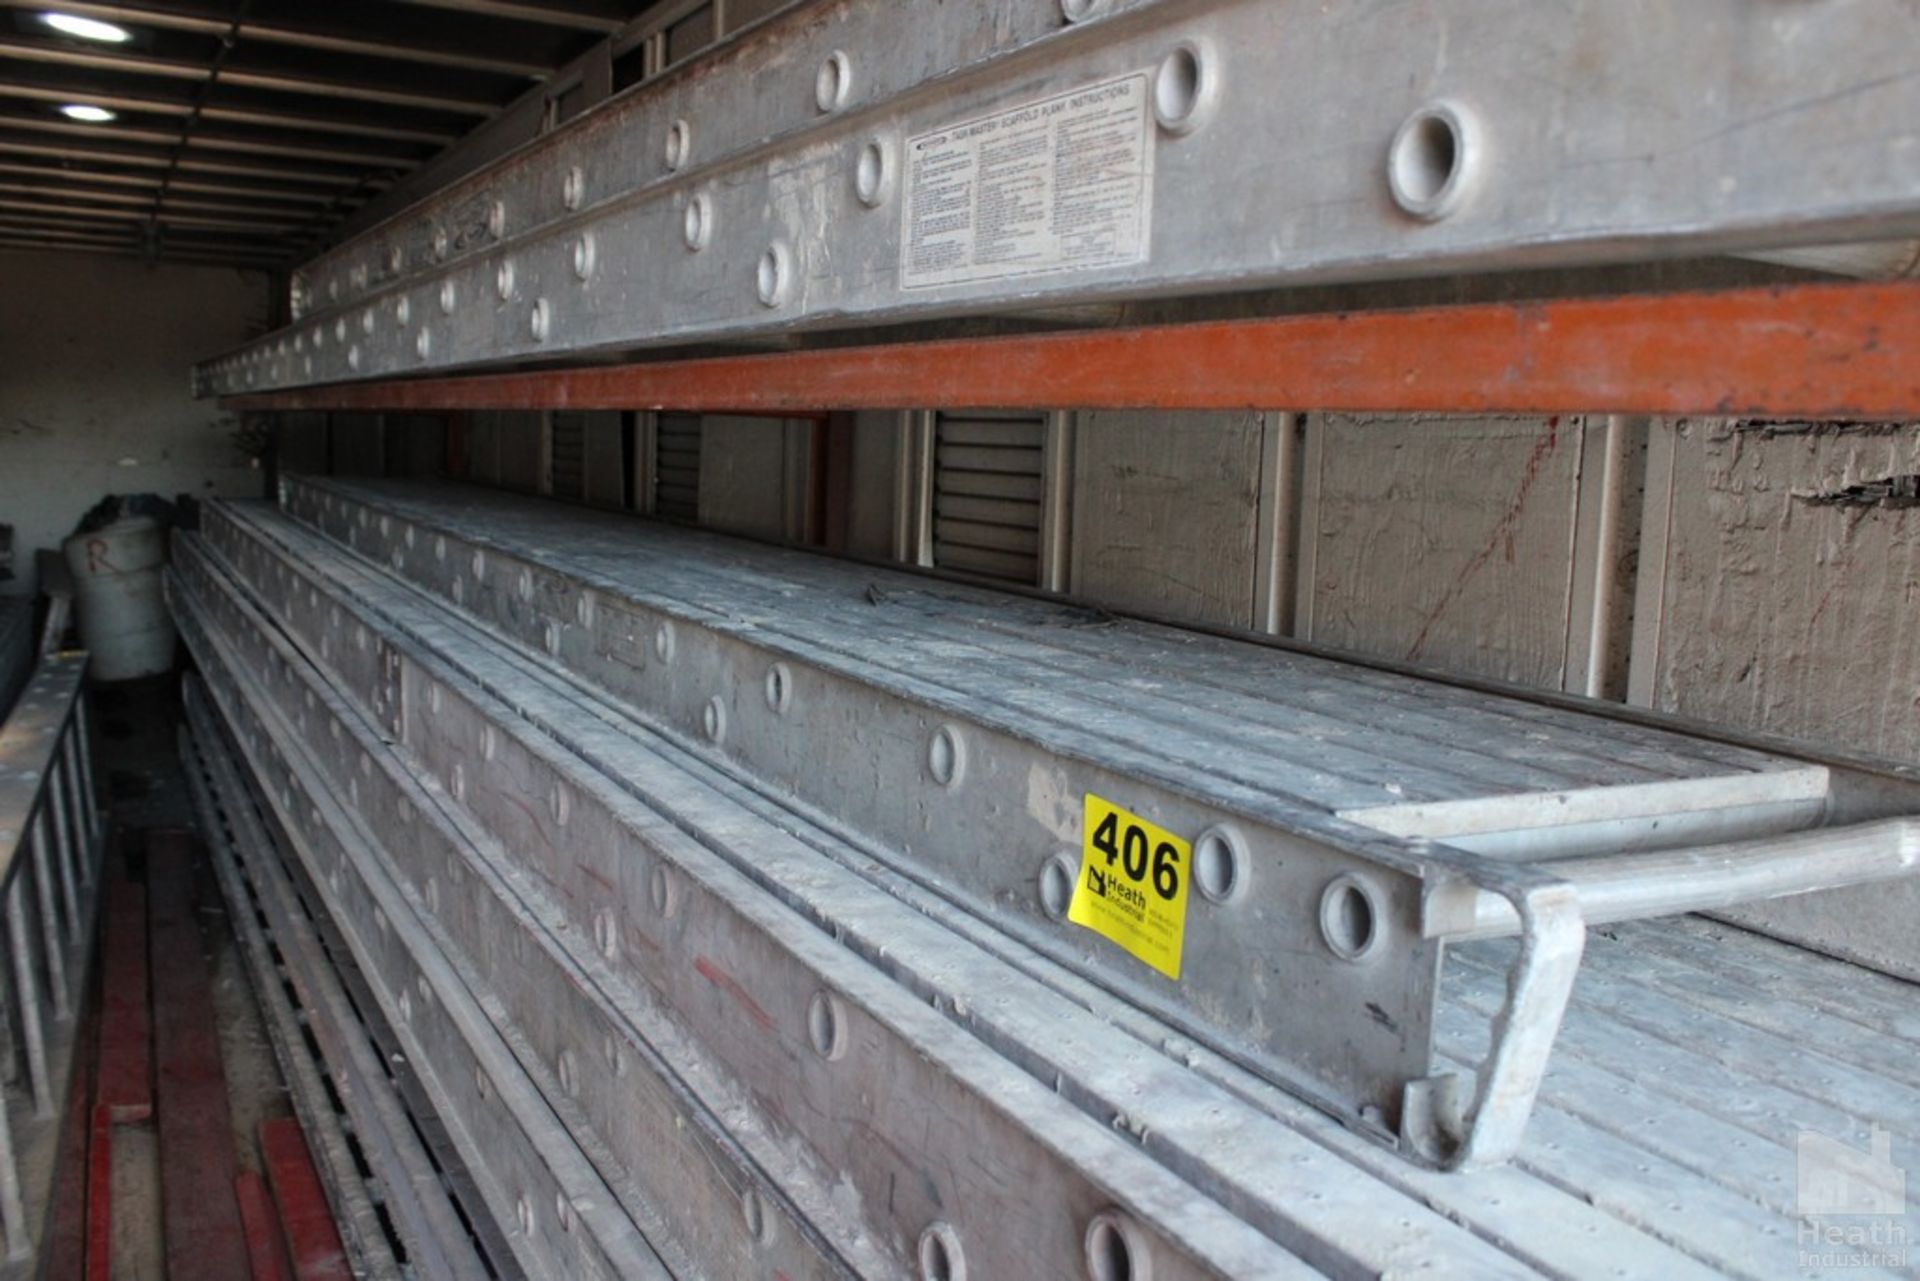 SECTION OF WERNER ALUMINUM SCAFFOLDING, 20" WIDE, 16FT. LONG